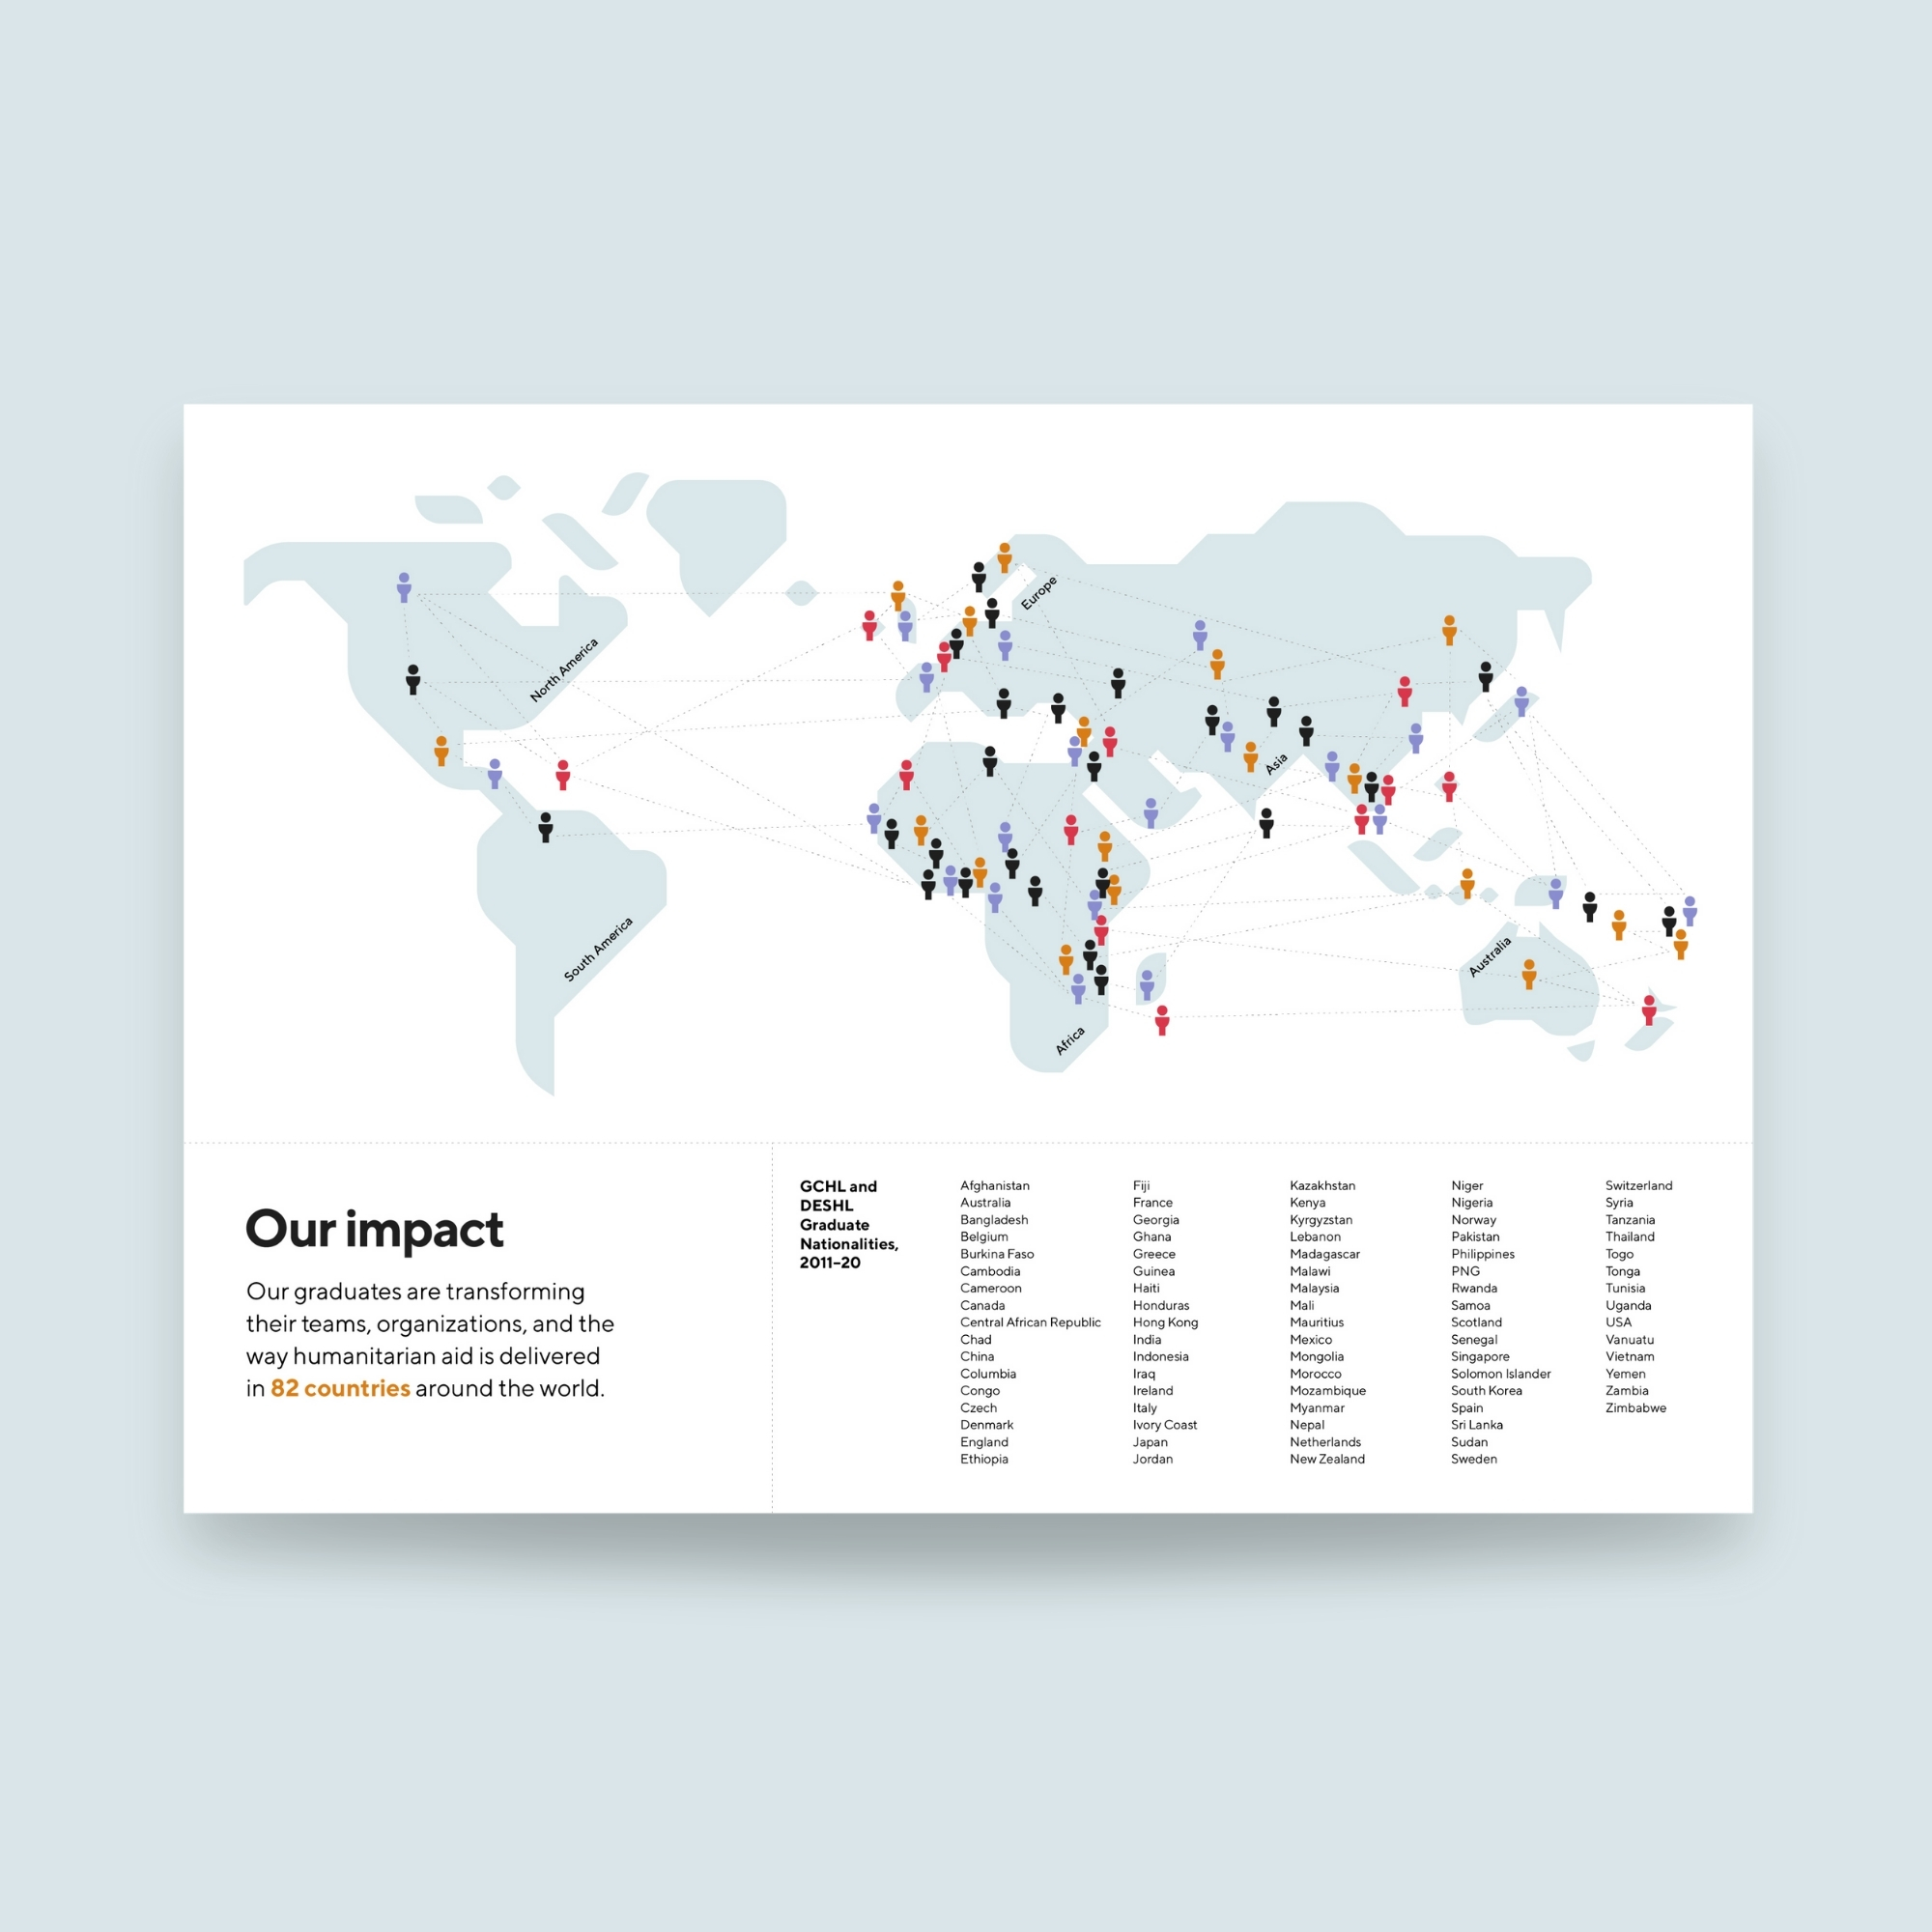 Centre for Humanitarian Leadership 'Our impact' infographic, featuring a world map indicating various sites around the globe where Deakin University's graduates are located.